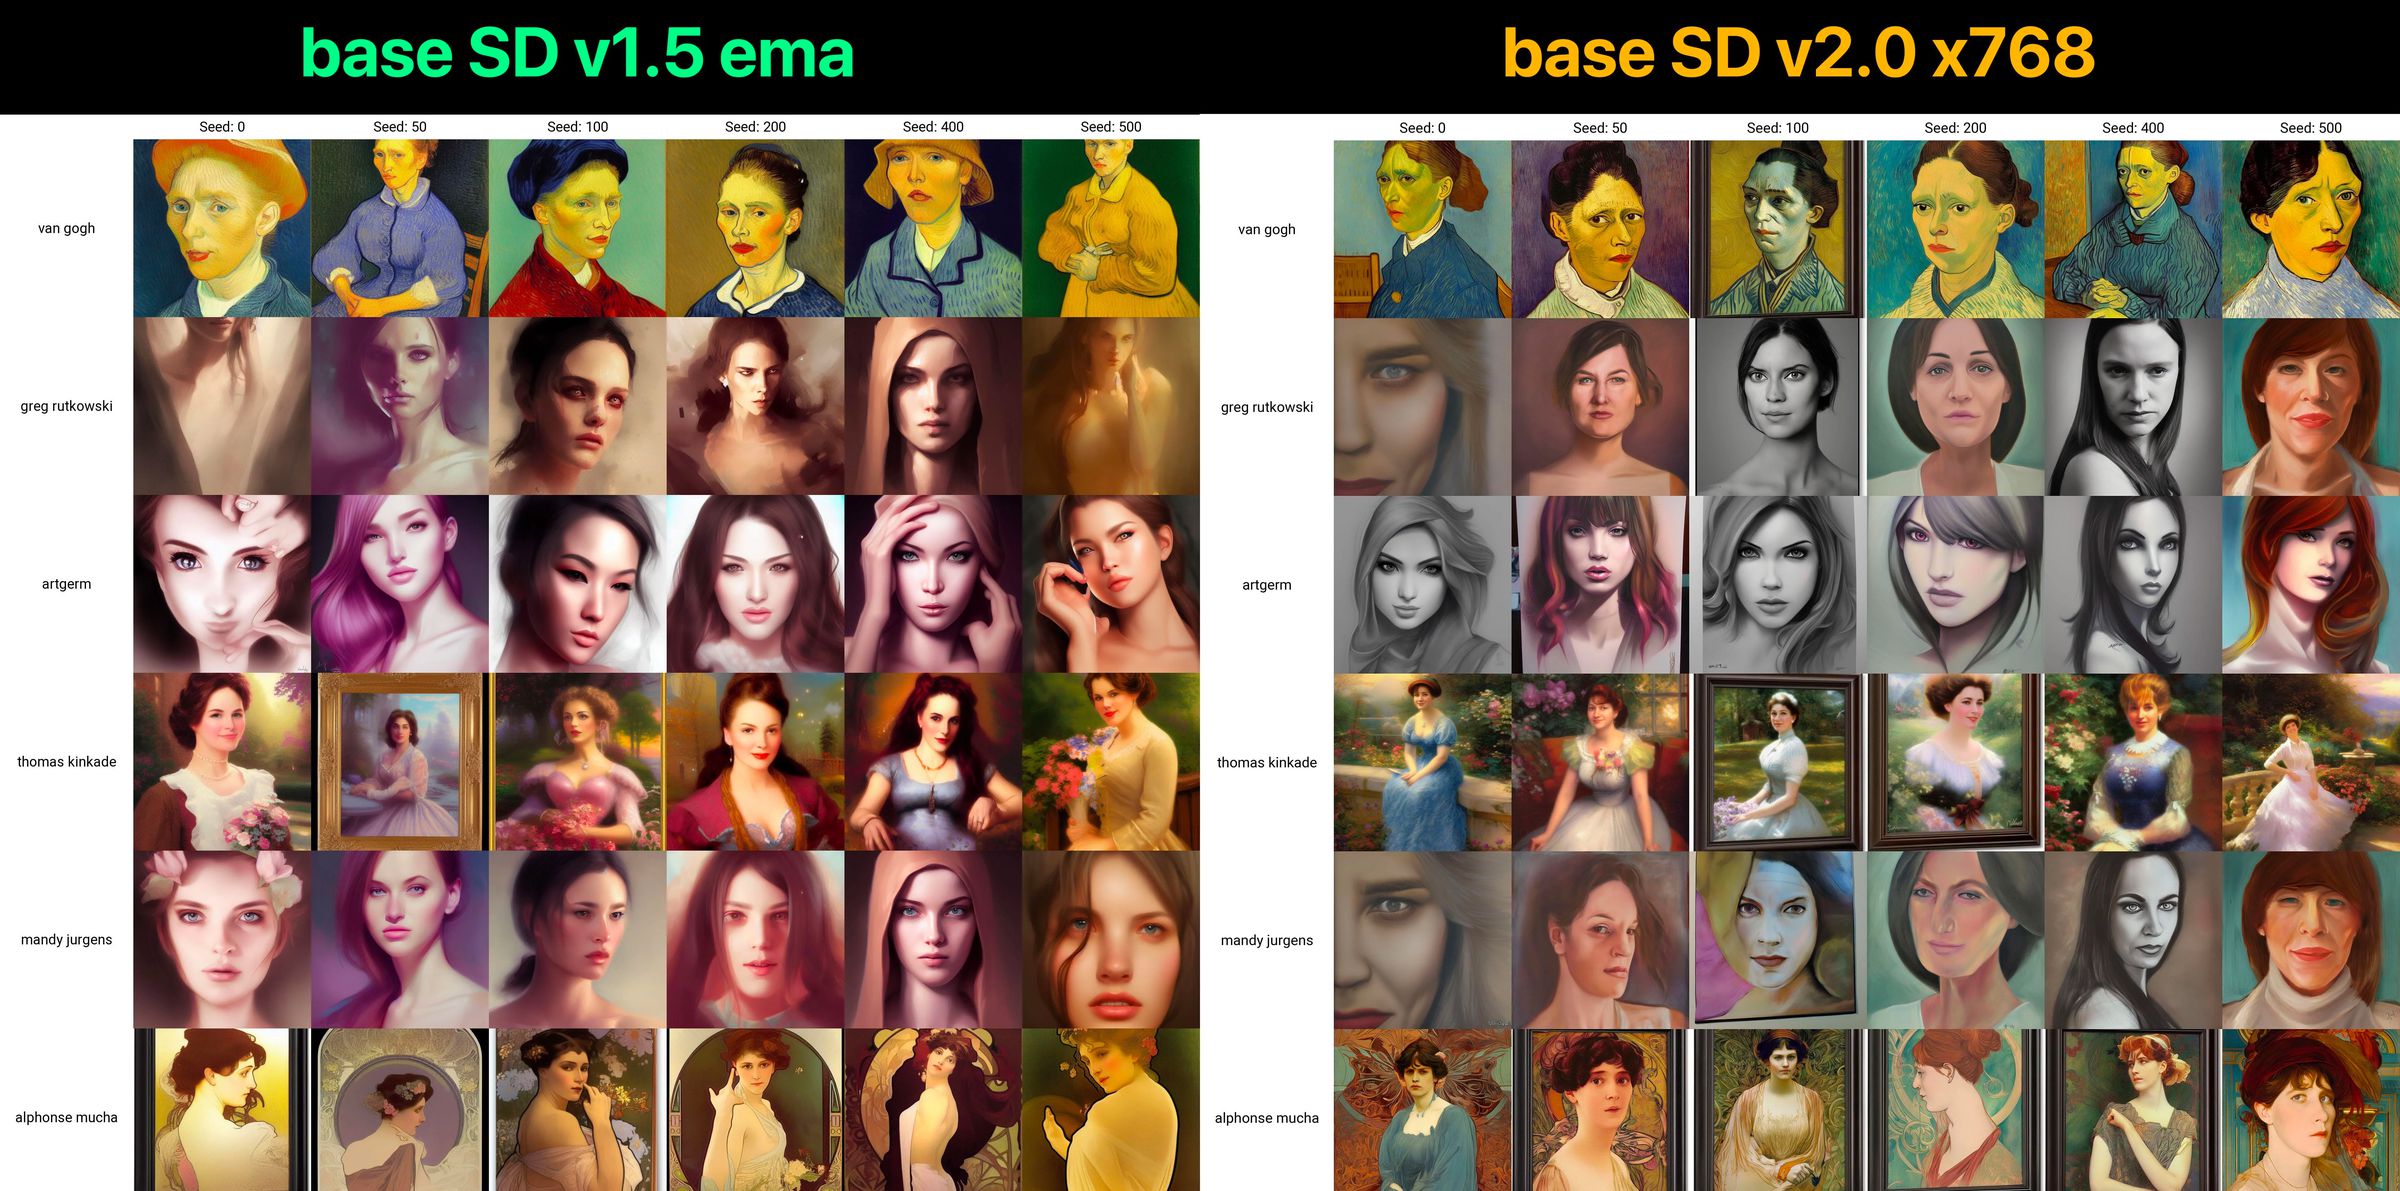 A grid of images showing side-by-side comparisons of AI generated artwork created using different versions of Stable Diffusion.